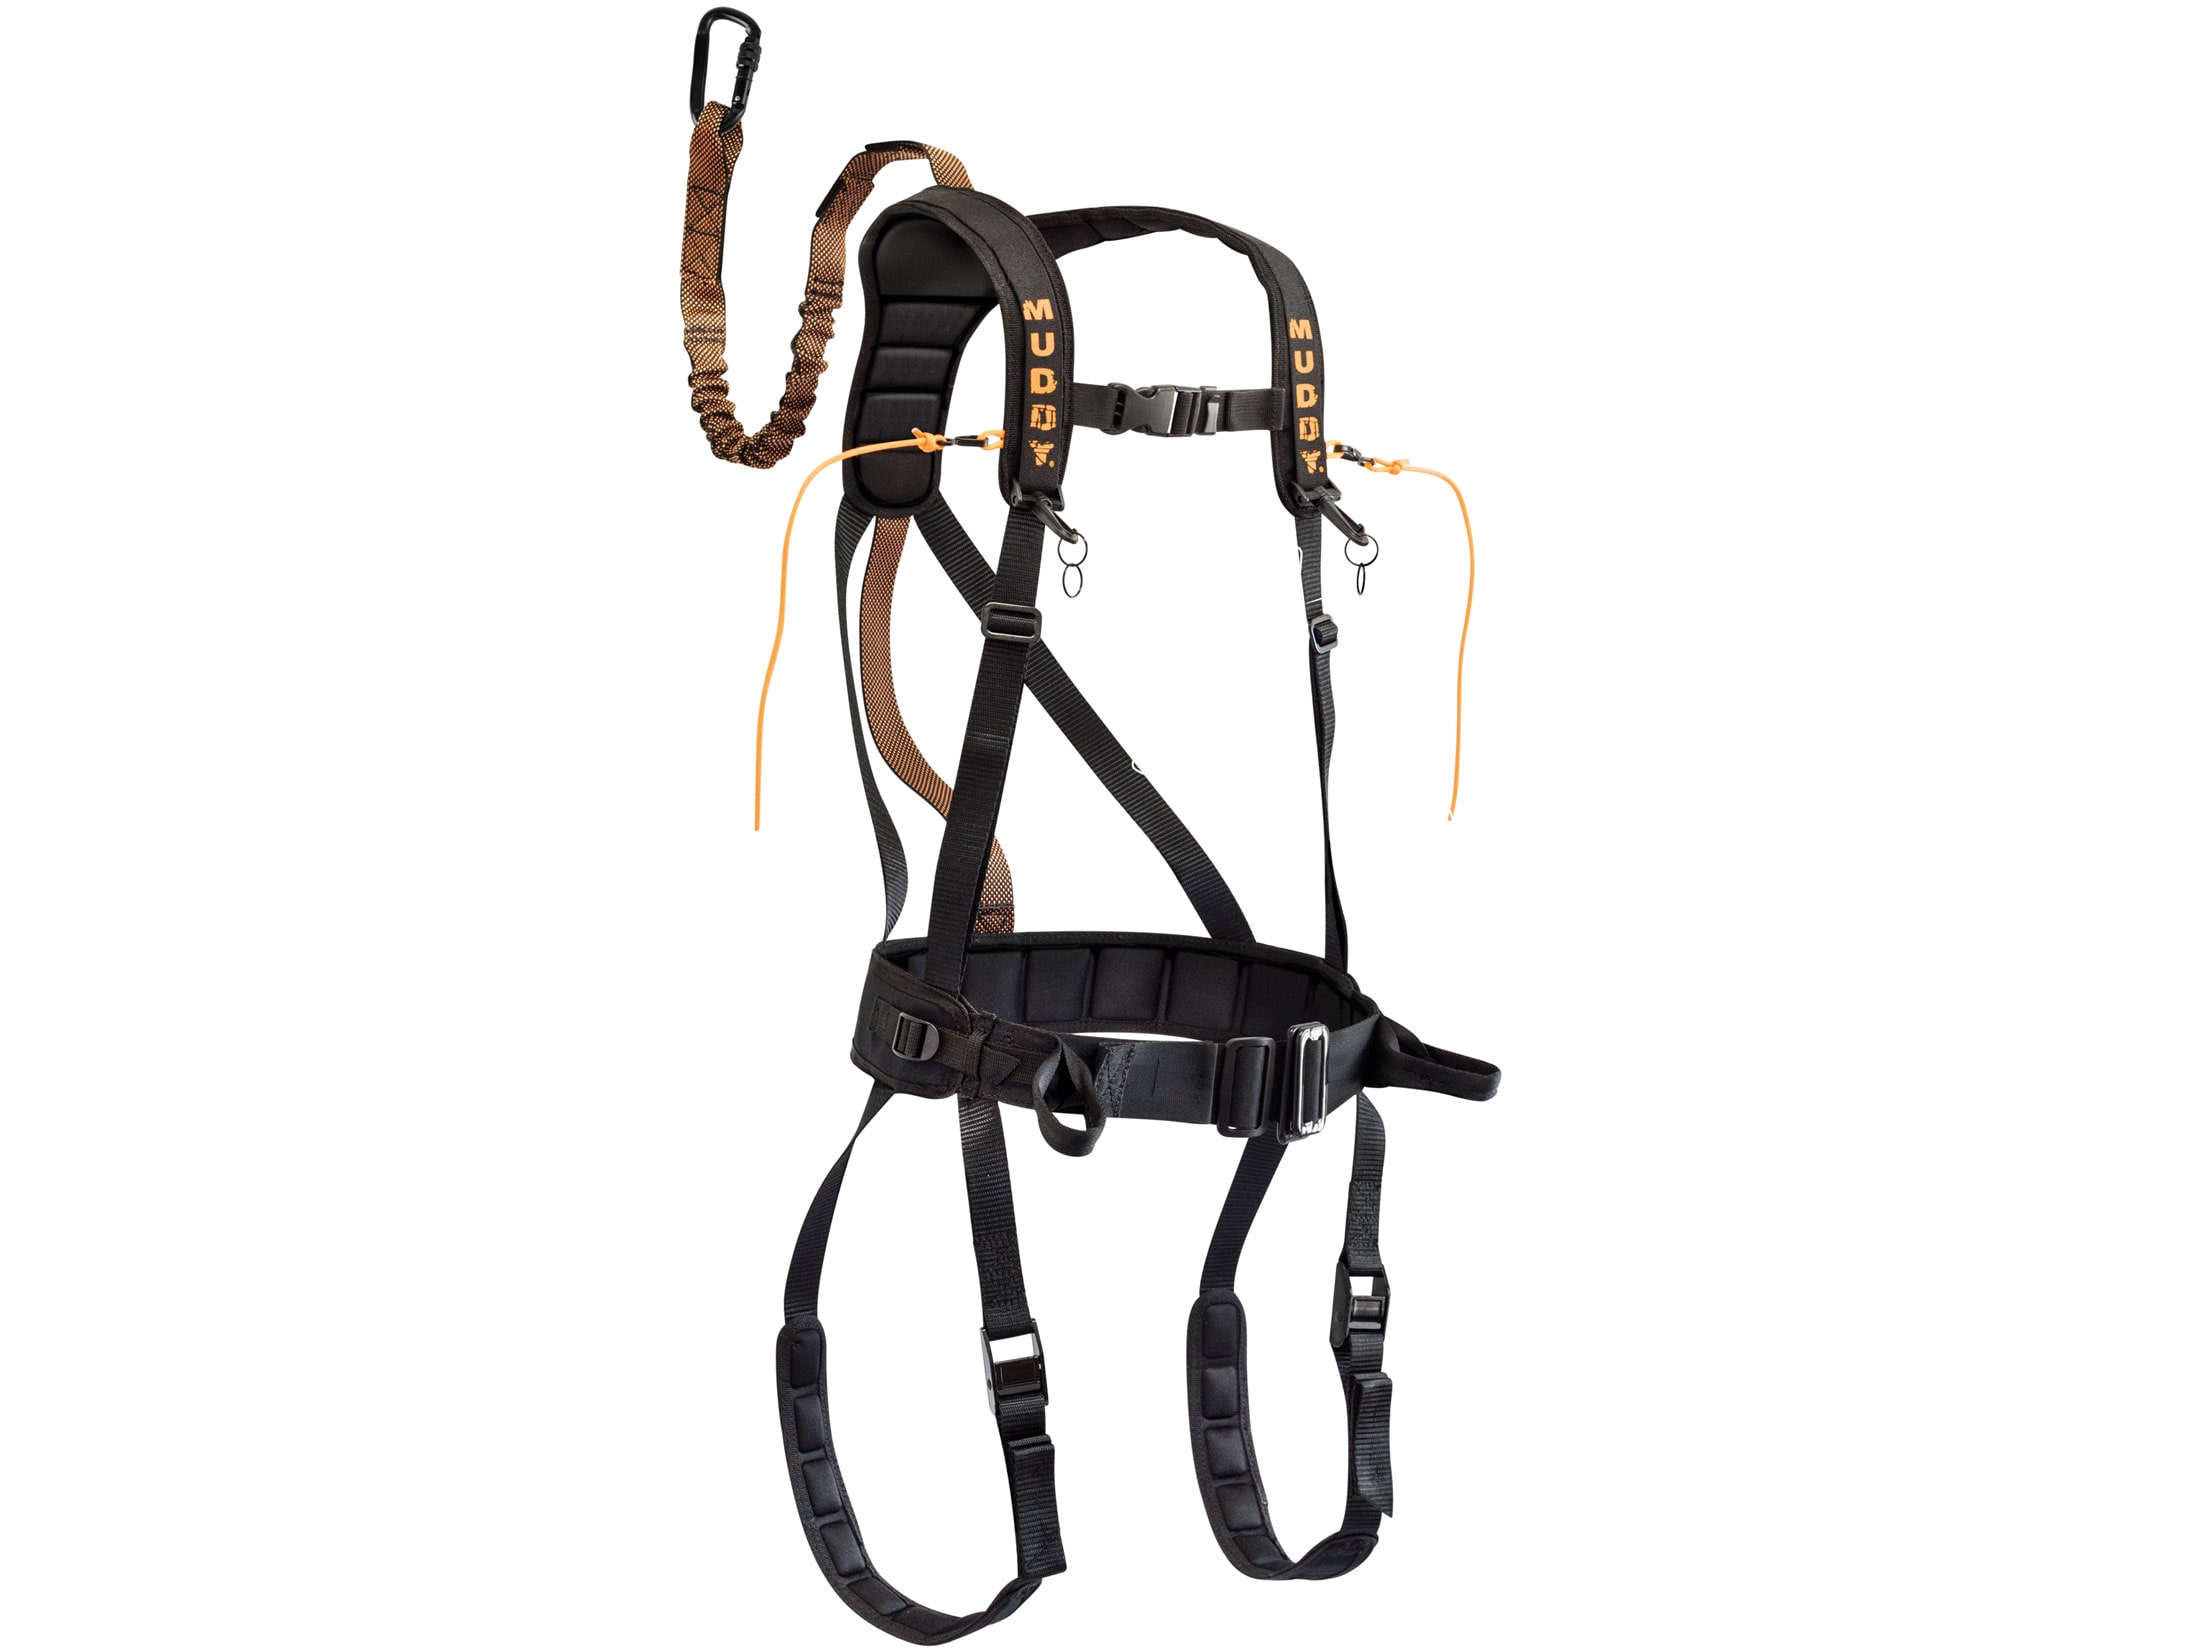 Muddy Outdoors The Safeguard Treestand Safety Harness Nylon Black Large